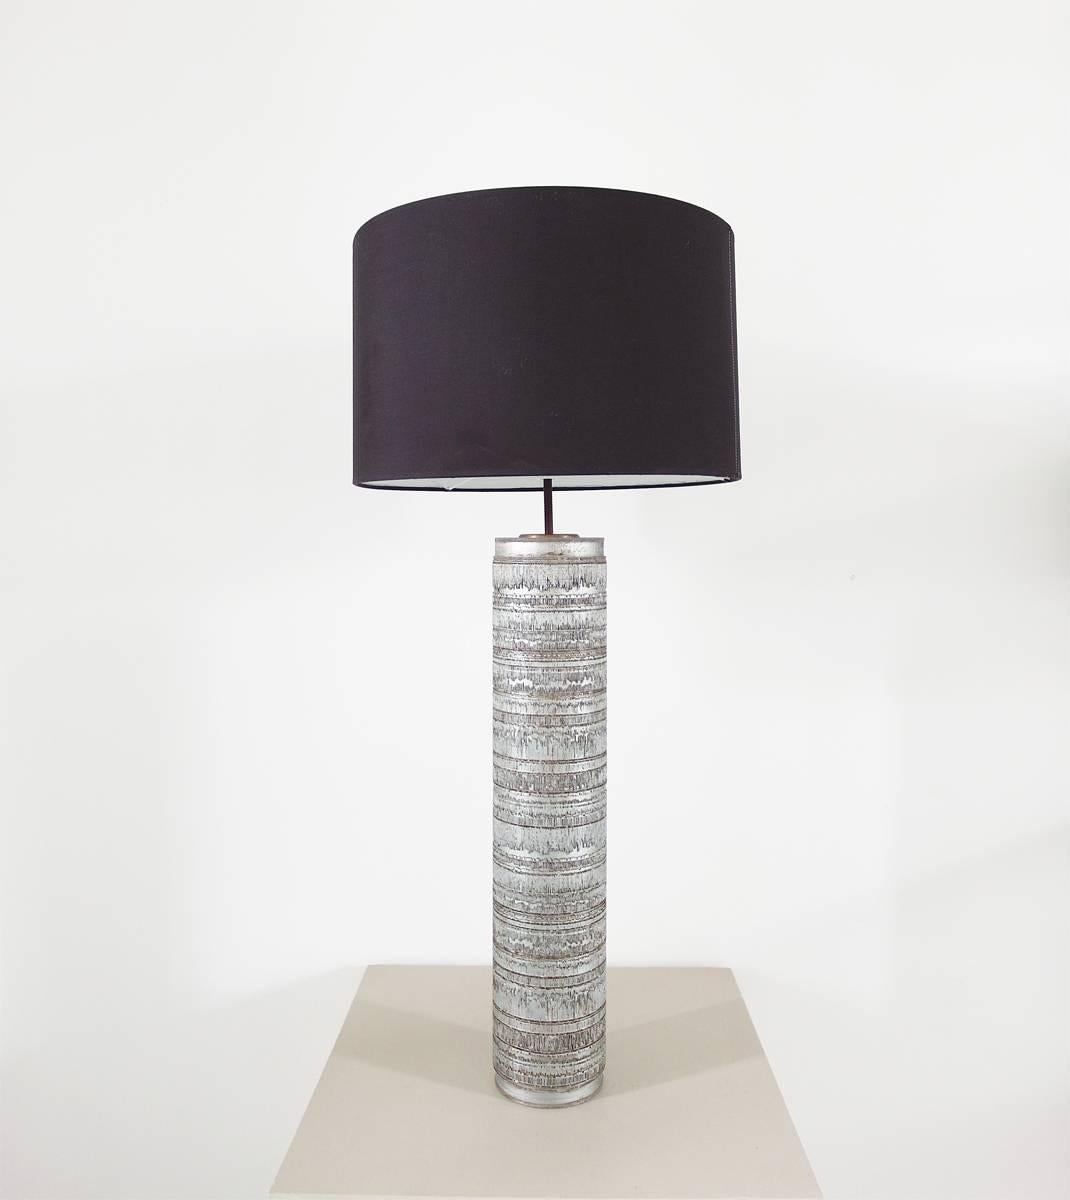 A large brutalist sculpted lamp base of cast aluminium artwork, signed Juvita Zoc, Baltic States Era, circa 1960s. 
Beautiful sculpted lamp base with a delicate carved graphic pattern, made of cast aluminium. The artwork reminds of Pia Manu reliefs